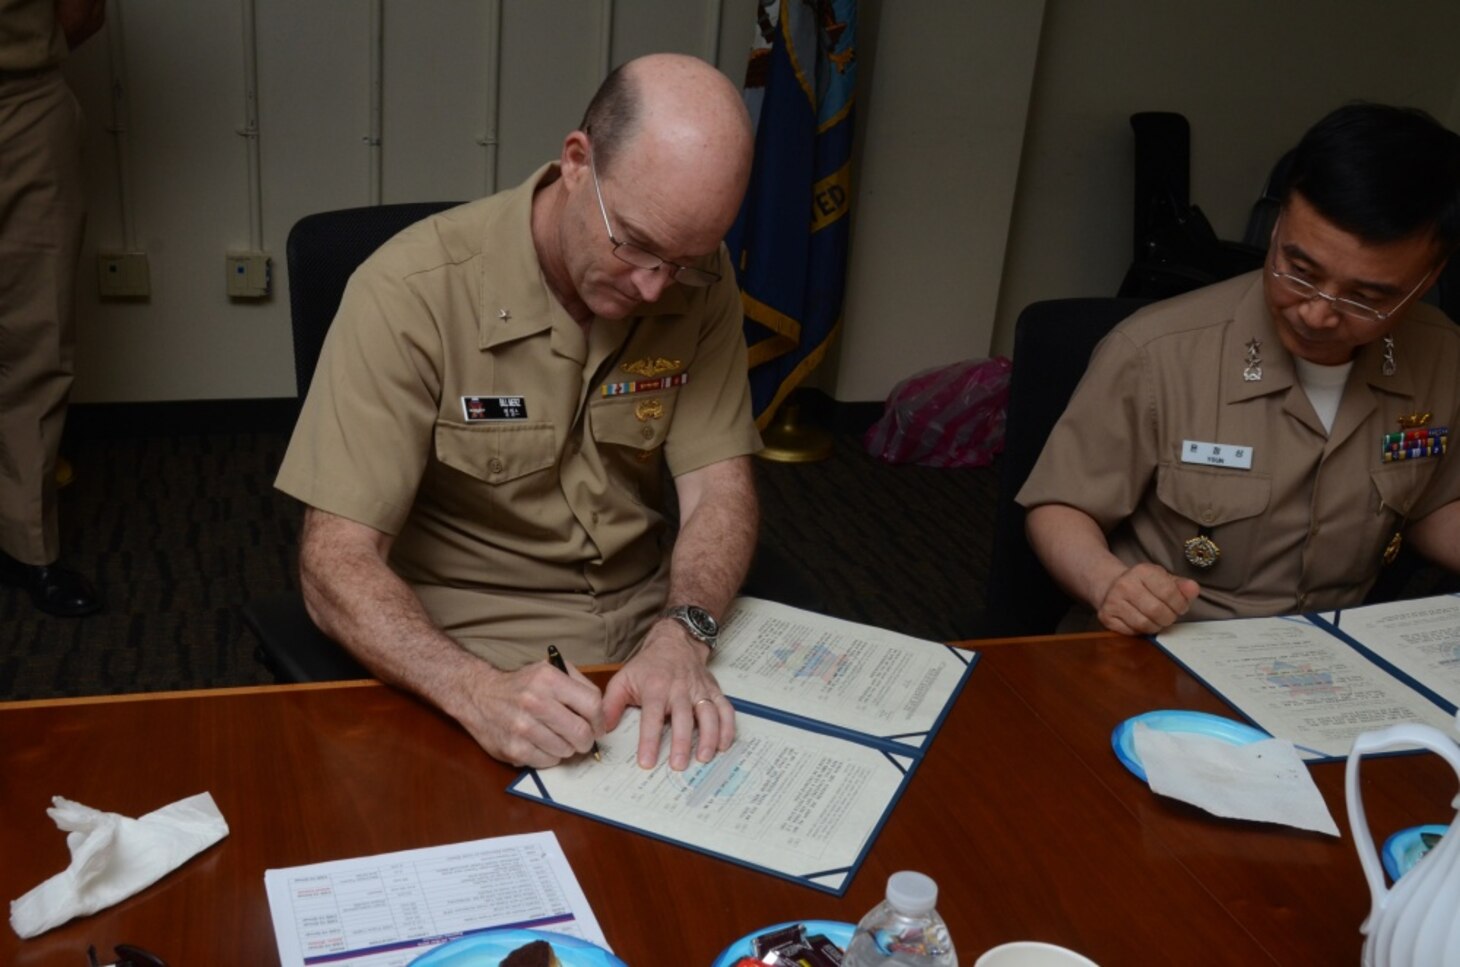 160331-N-YM720-263 SANTA RITA, Guam (March 31, 2016) Rear Adm. William Merz, commander, Submarine Group 7, left, and Rear Adm. Youn Jeong Sang, commander, Submarine Force, Republic of Korea Navy (ROKN), sign a formal agreement at the conclusion of the 43rd Submarine Warfare Committee Meeting (SWCM) reaffirming the longstanding relationship between the two countries and pledging continued support between the two submarine forces. SWCM is a bilateral discussion between the U.S. and ROKN submarine forces designed to foster the partnership and focuses on submarine tactics, force integraton and future submarine development. (U.S. Navy photo by MC3 Allen McNair/Released)